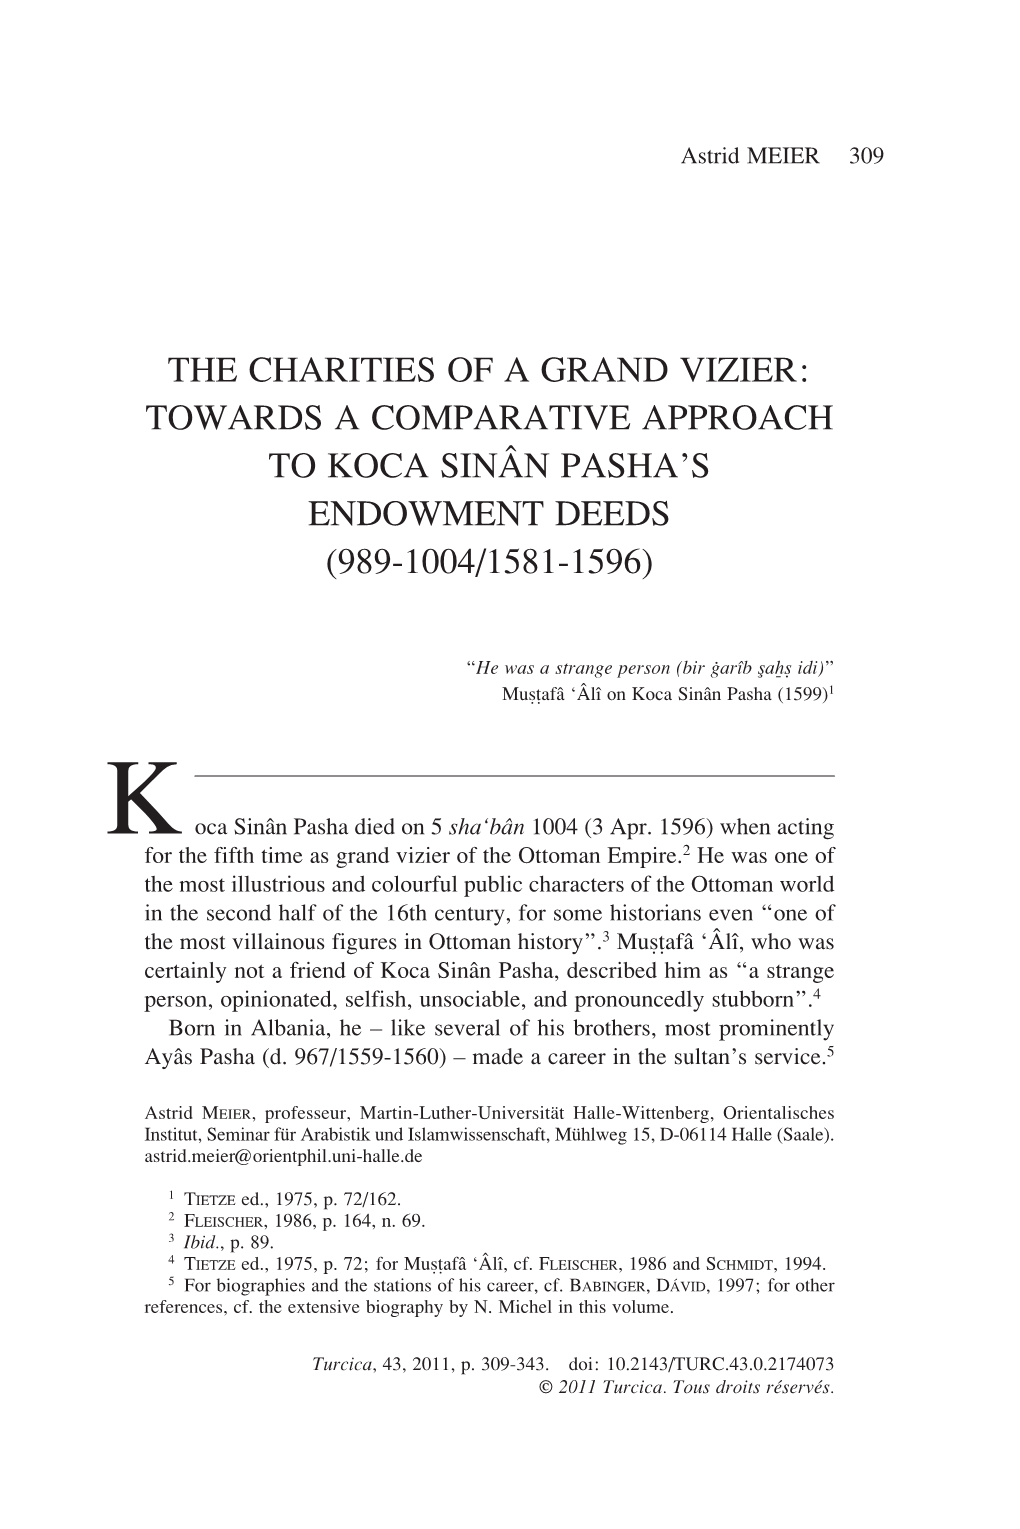 The Charities of a Grand Vizier: Towards a Comparative Approach to Koca Sinân Pasha’S Endowment Deeds (989-1004/1581-1596)